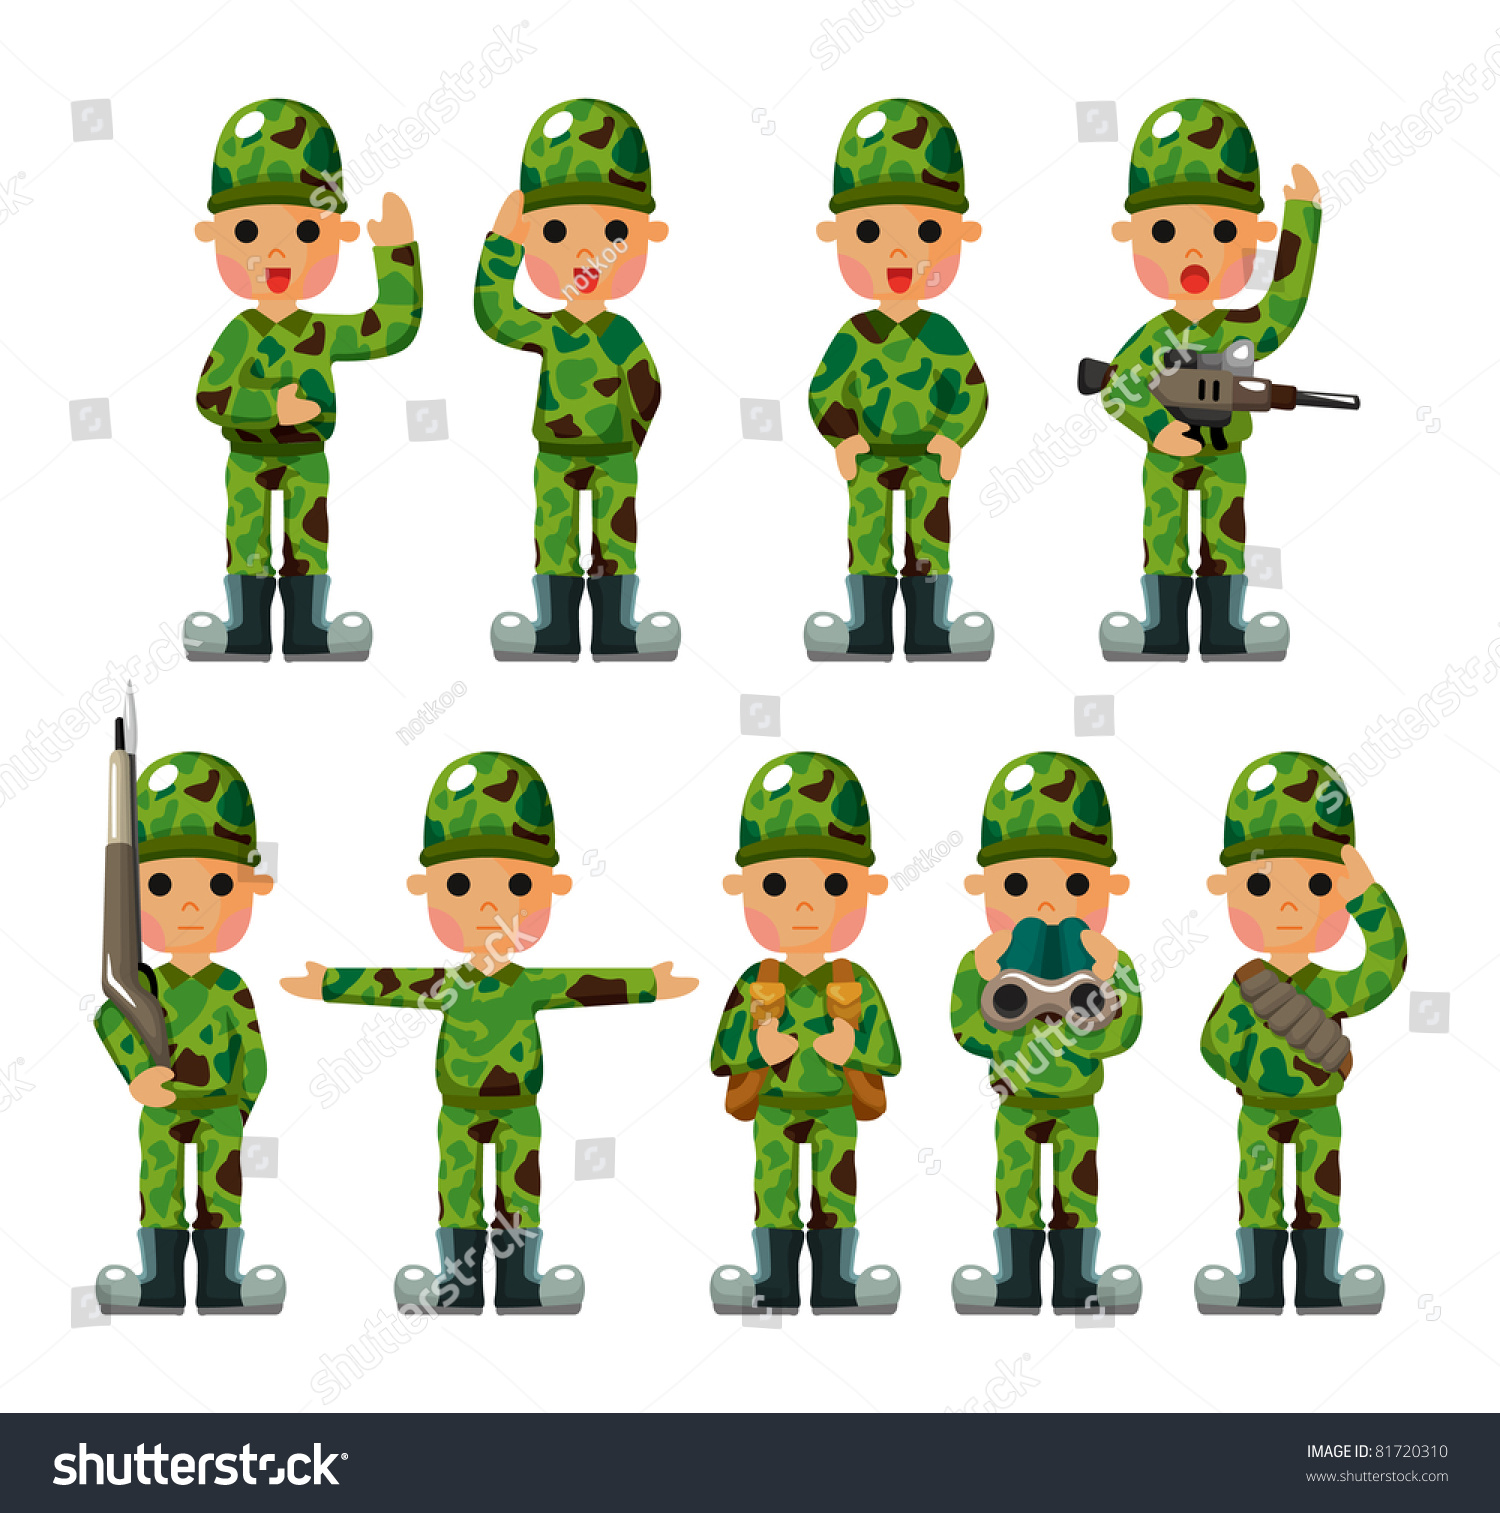 Cartoon Soldier Icons Set Stock Vector (Royalty Free) 81720310